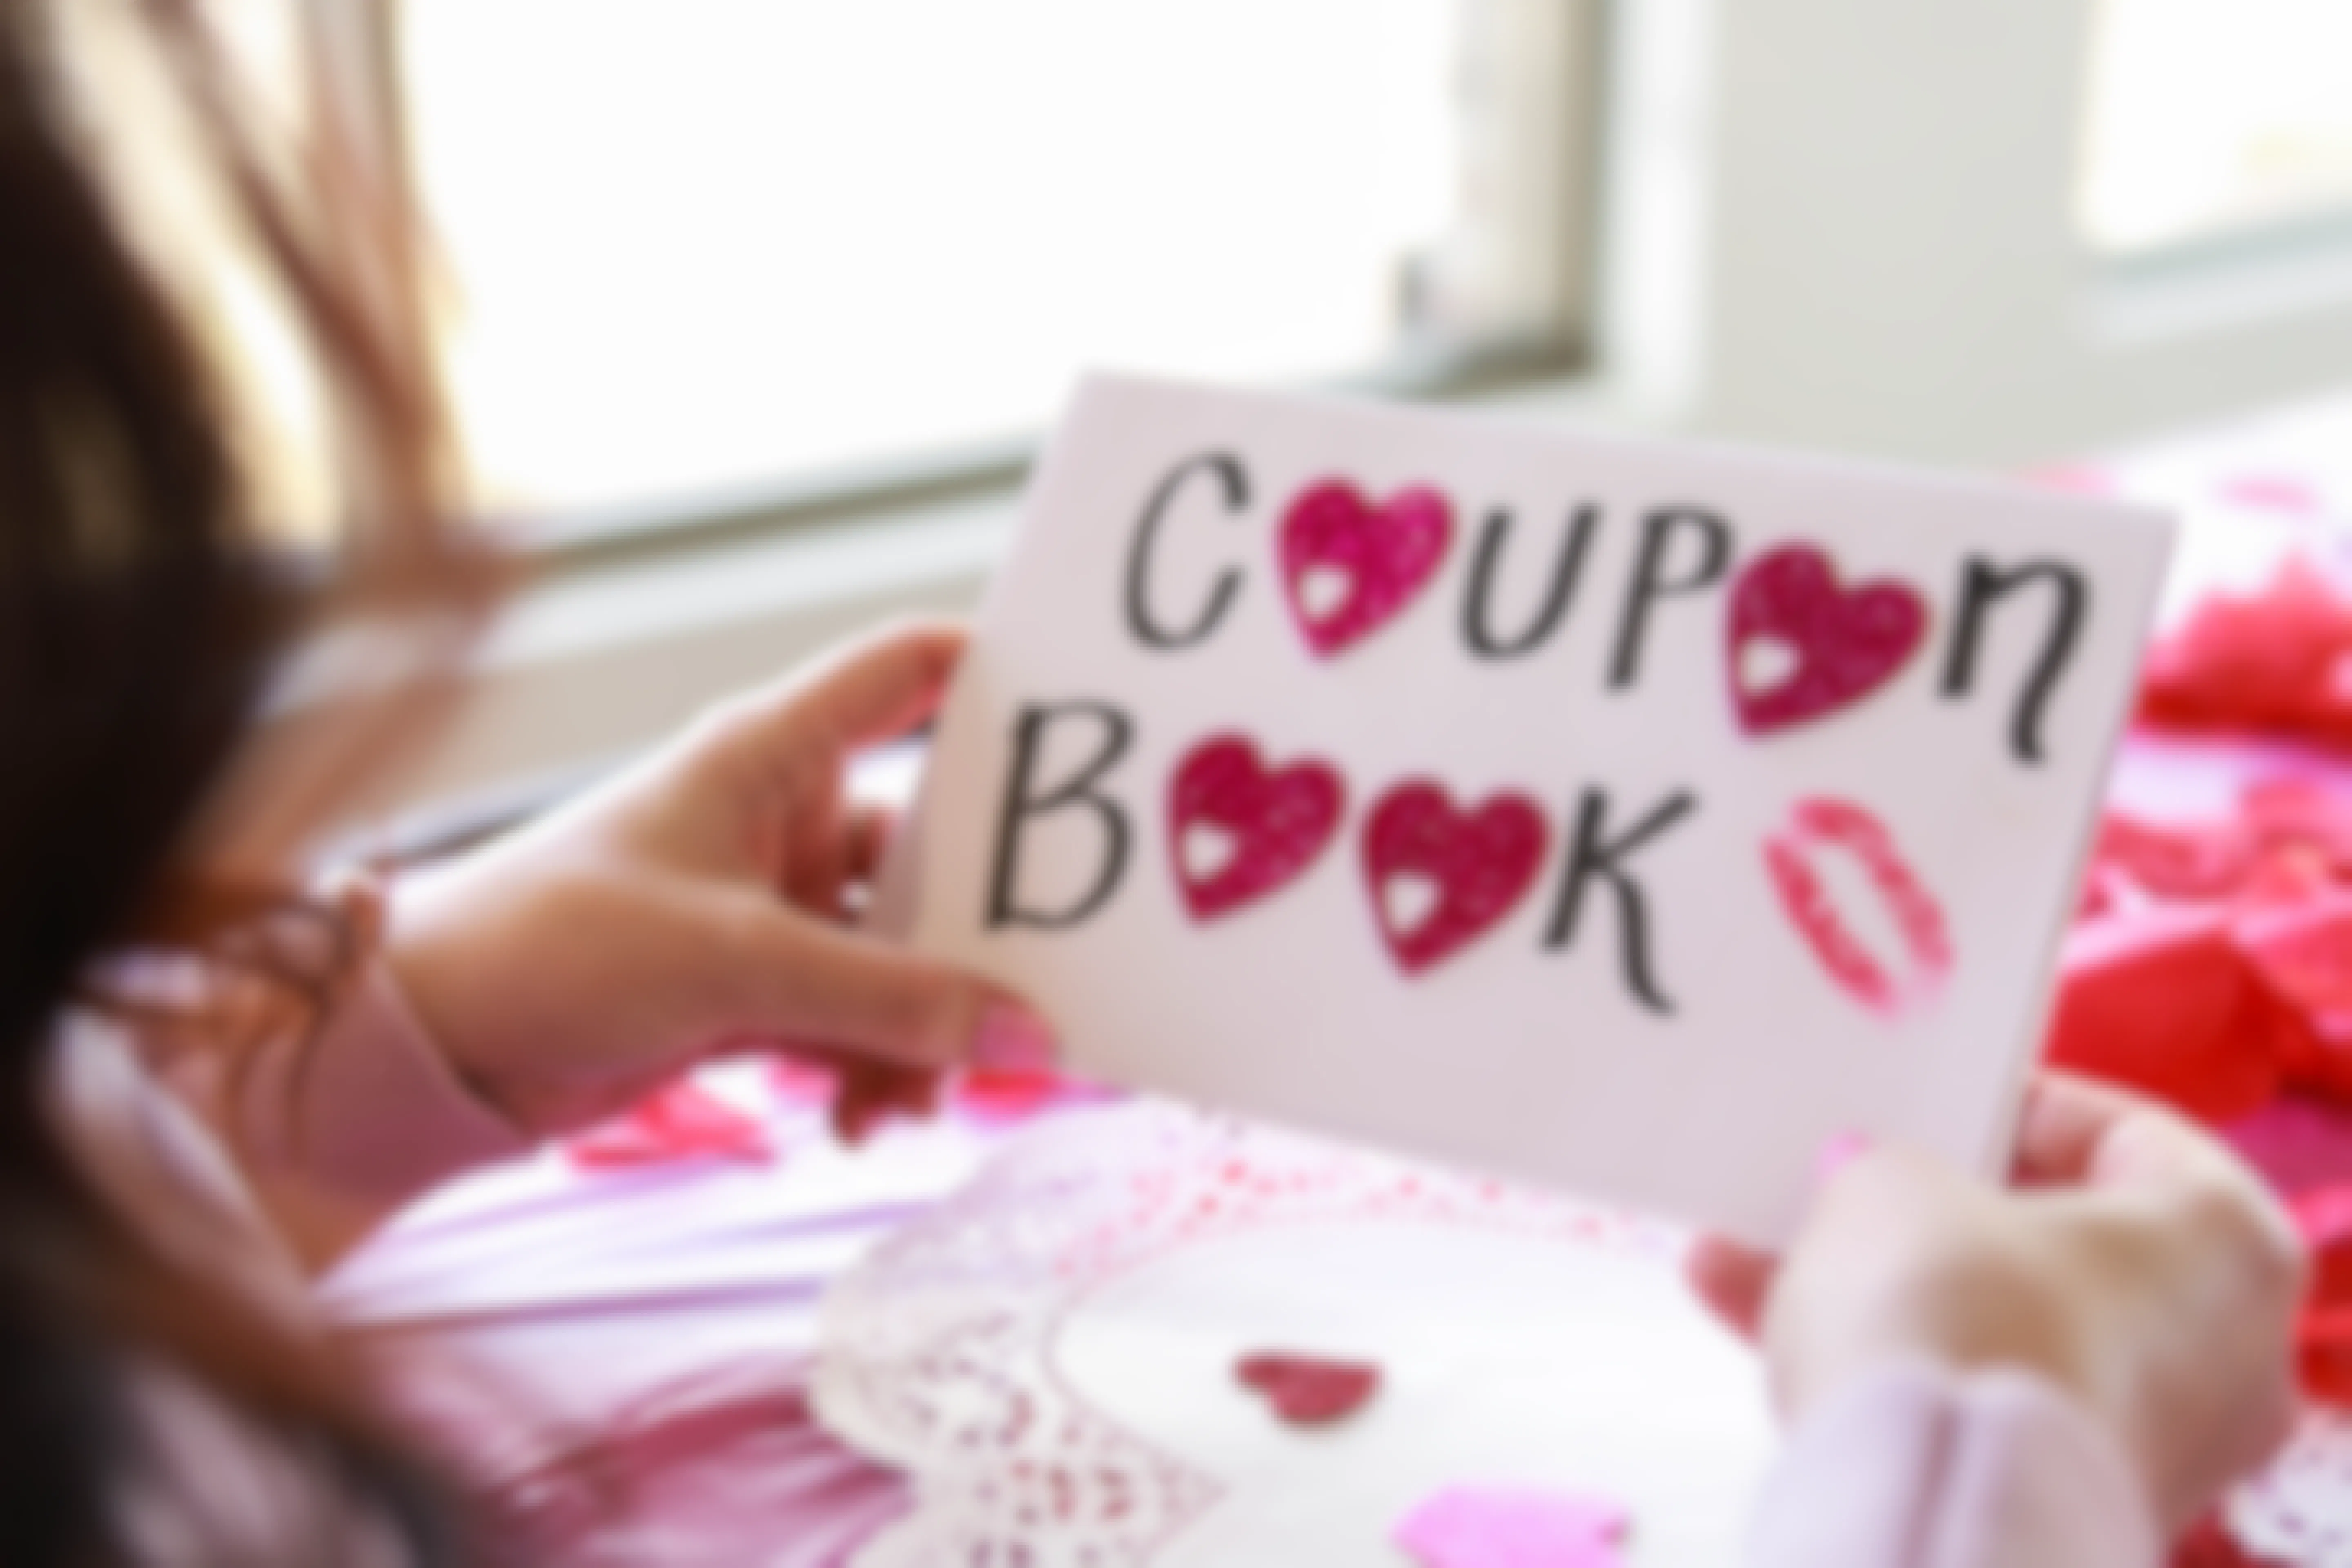 101 Free Love Coupons for Your Partner